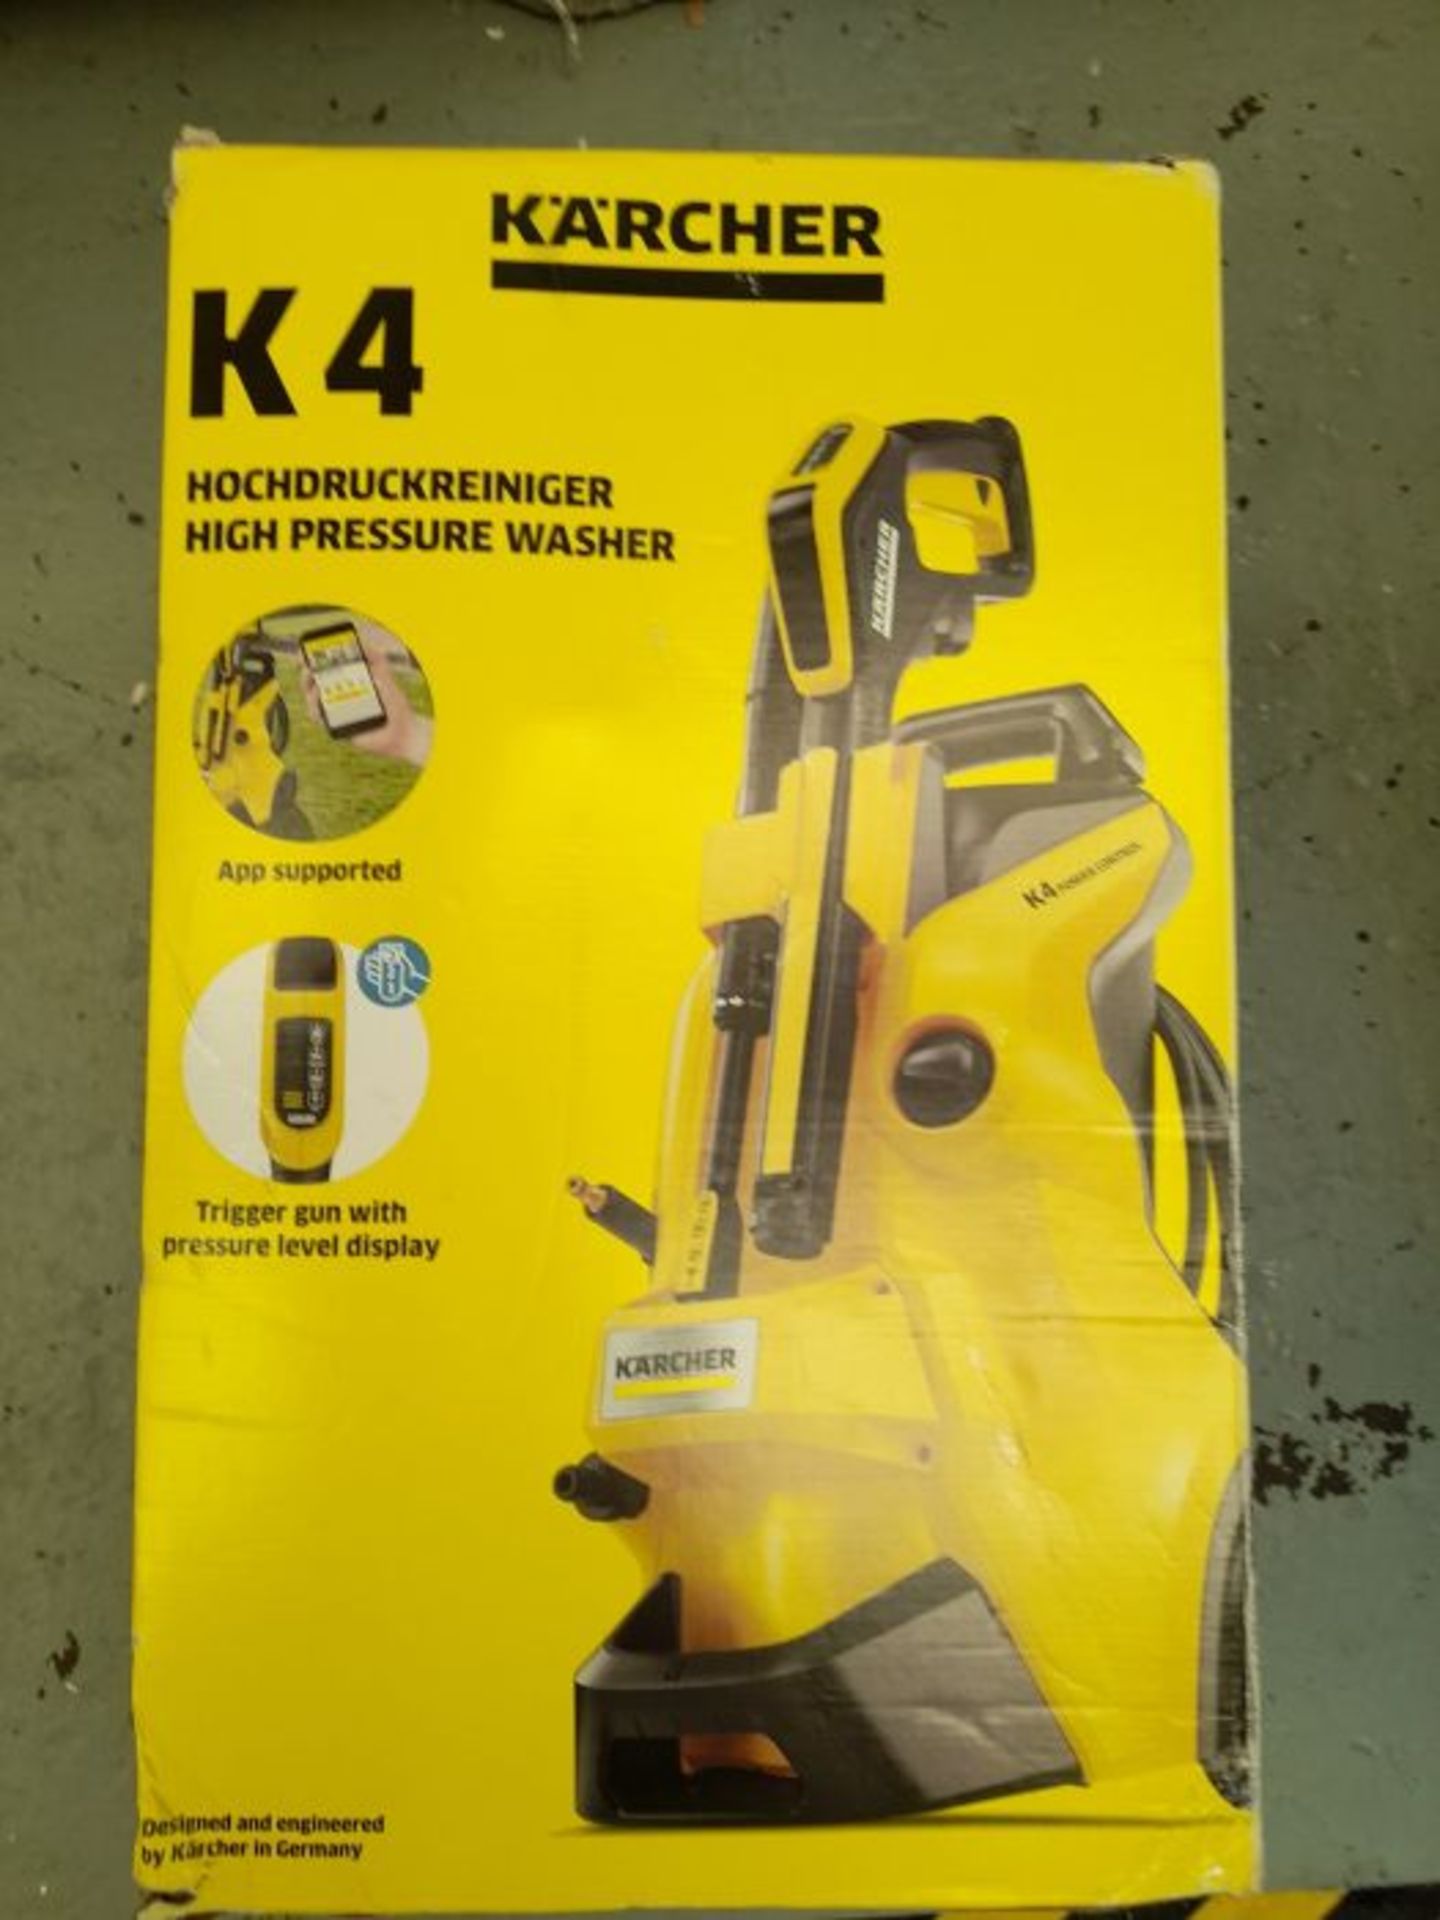 RRP £185.00 Kärcher K 4 Power Control high pressure washer: Intelligent app support - the right s - Image 2 of 3